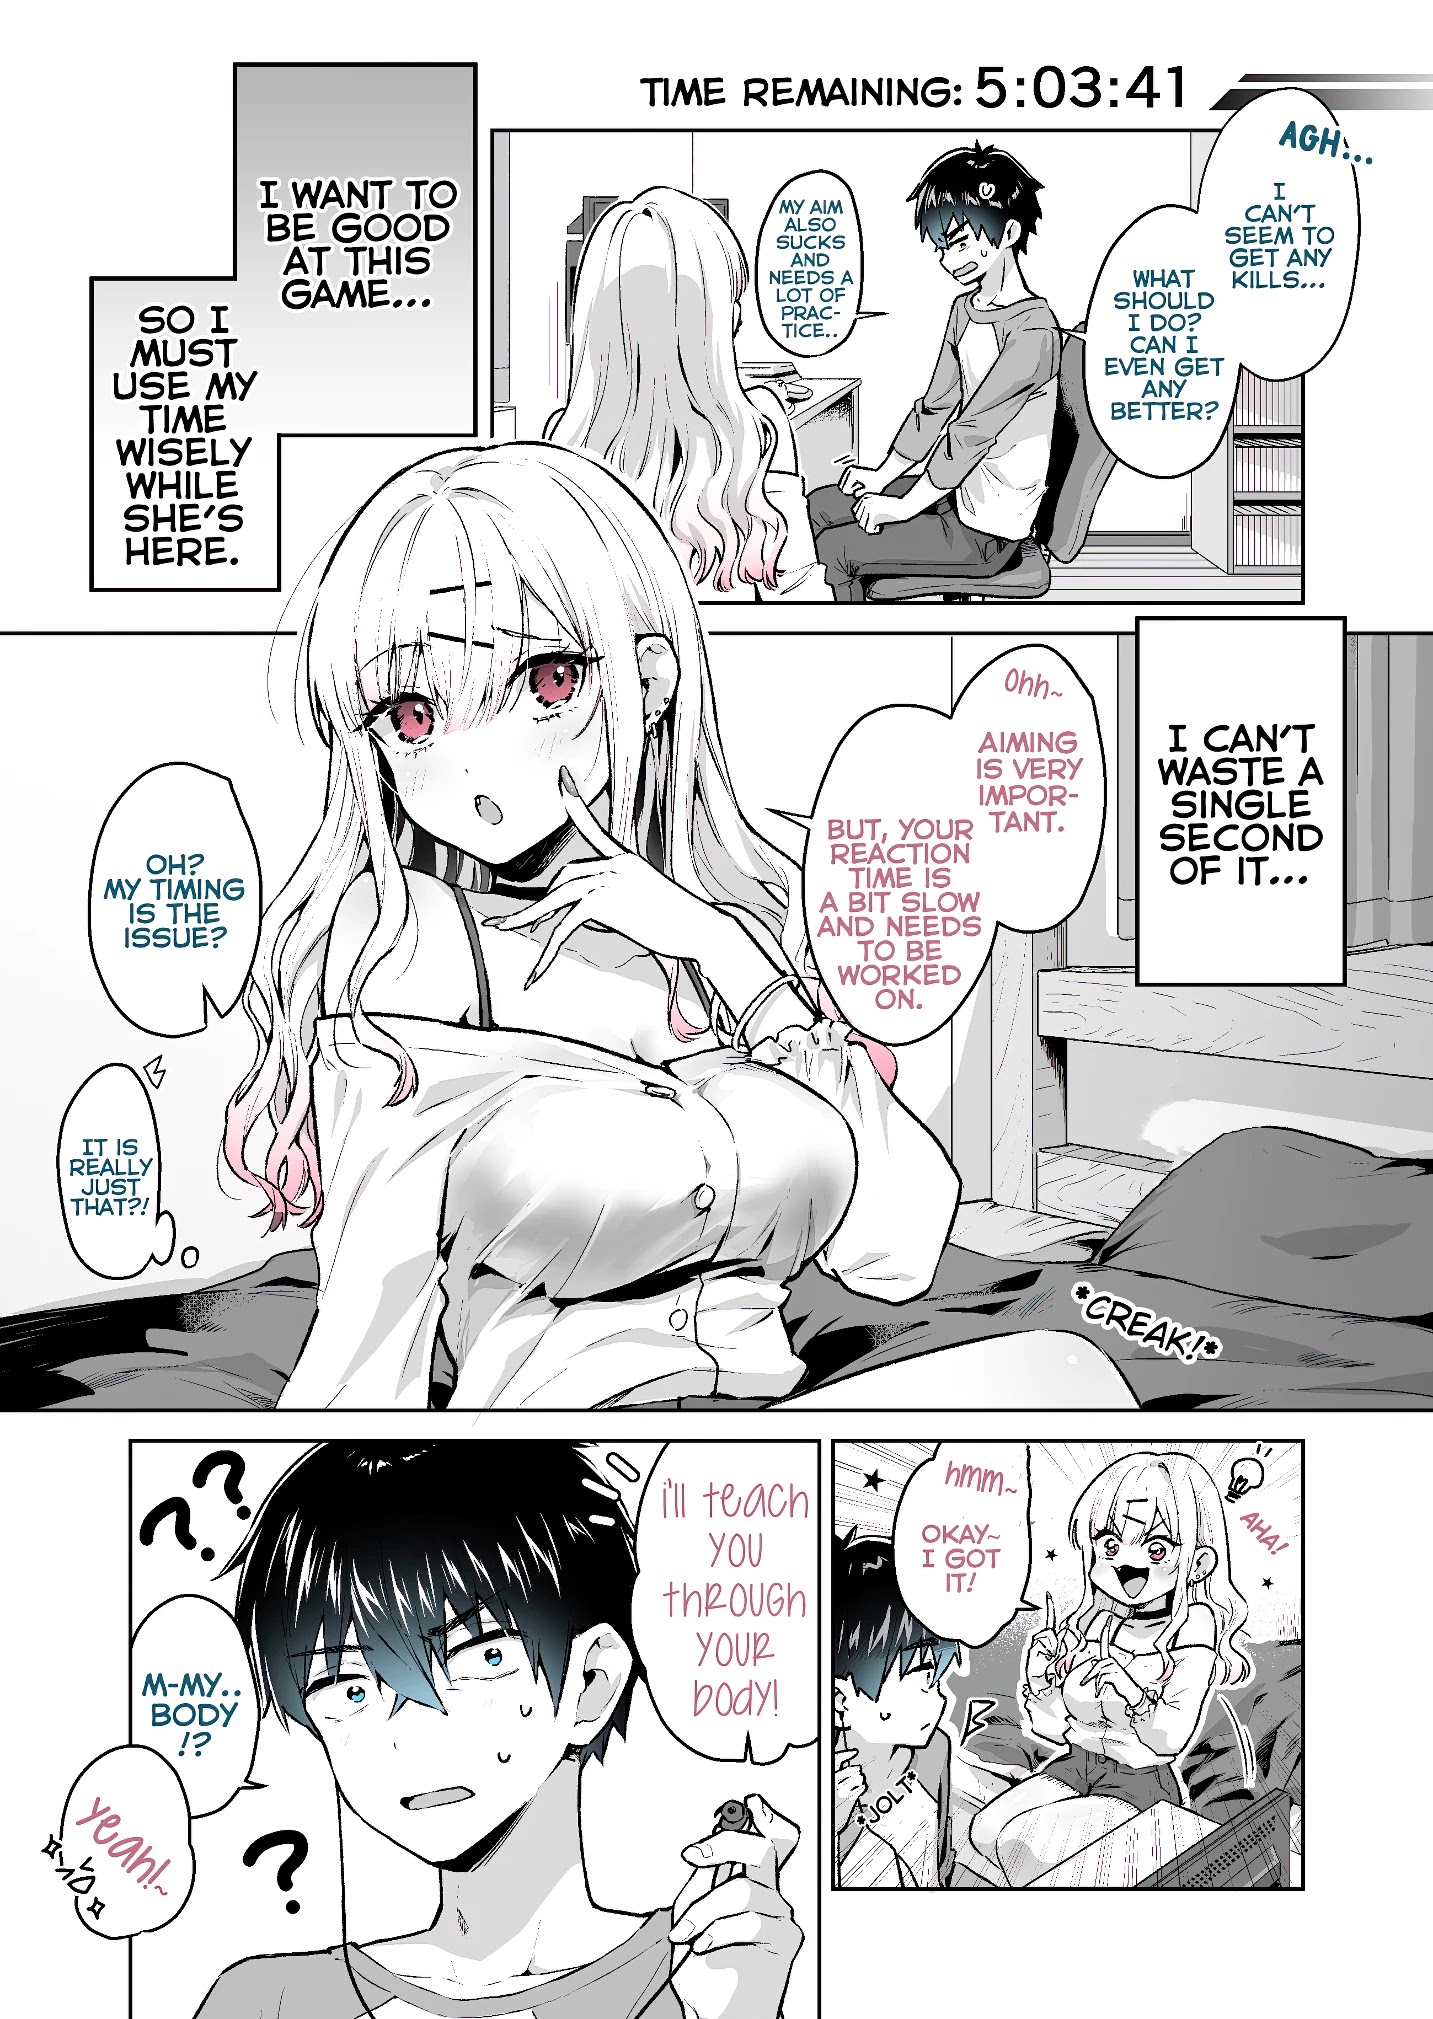 I Want To Be Praised By A Gal Gamer! - Page 2